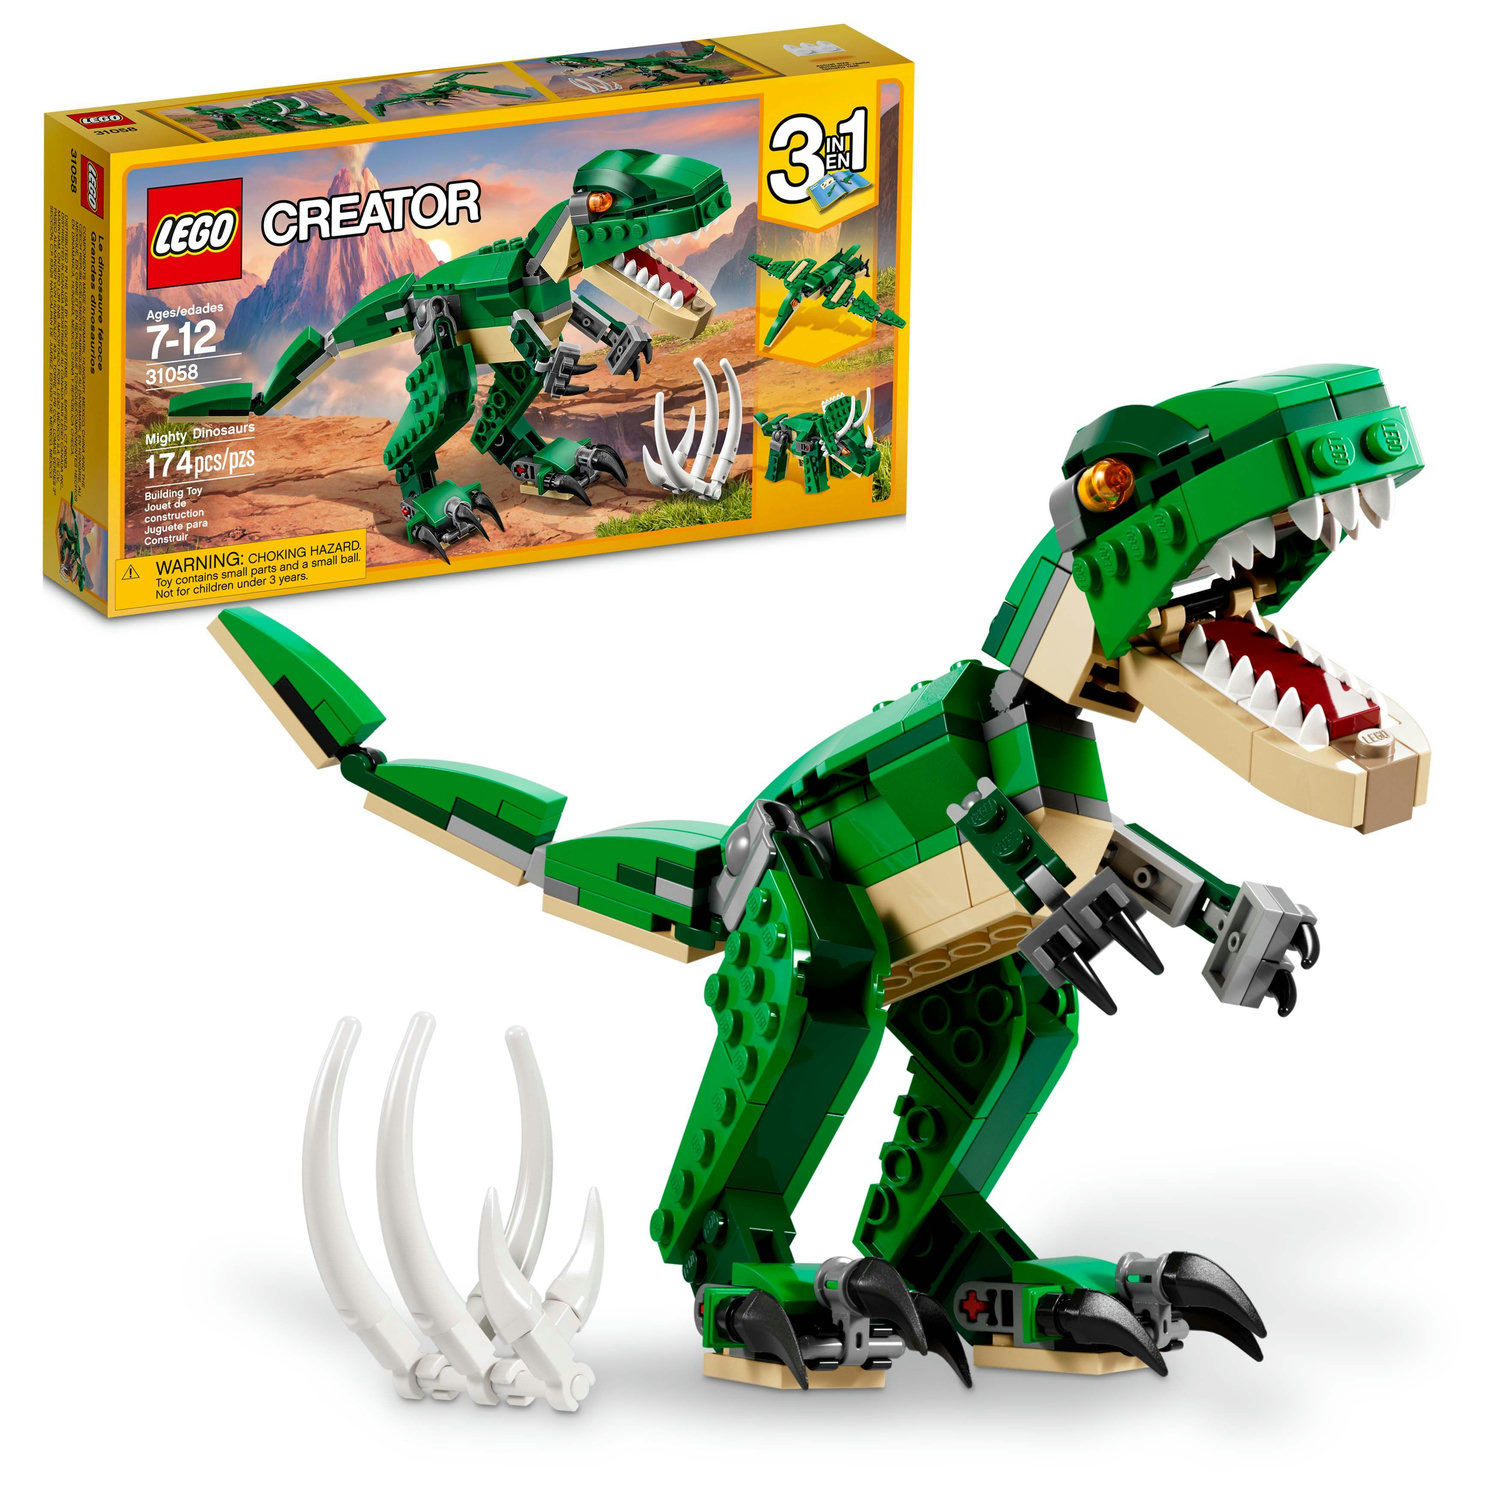 LEGO Creator 3 in 1 Mighty Dinosaur Toy, Transforms from T. rex to Triceratops to Pterodactyl Dinosaur Figures, Great Gift for 7 - 12 Year Old Boys & Girls, 31058 - image 1 of 4